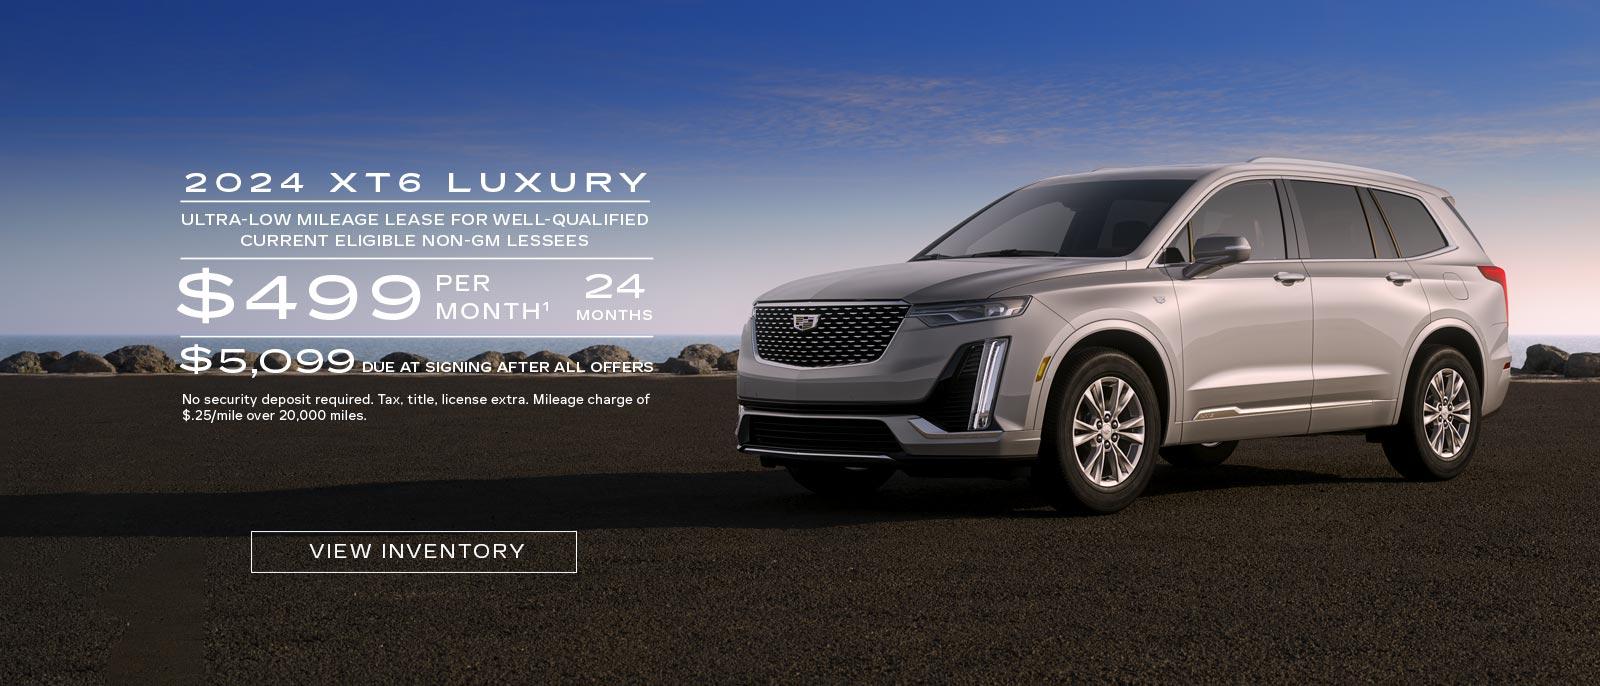 2024 XT6 Luxury. Ultra-low mileage lease for well-qualified current eligible GM lessees. $499 per month. 24 months. $5,099 due at signing after all offers.